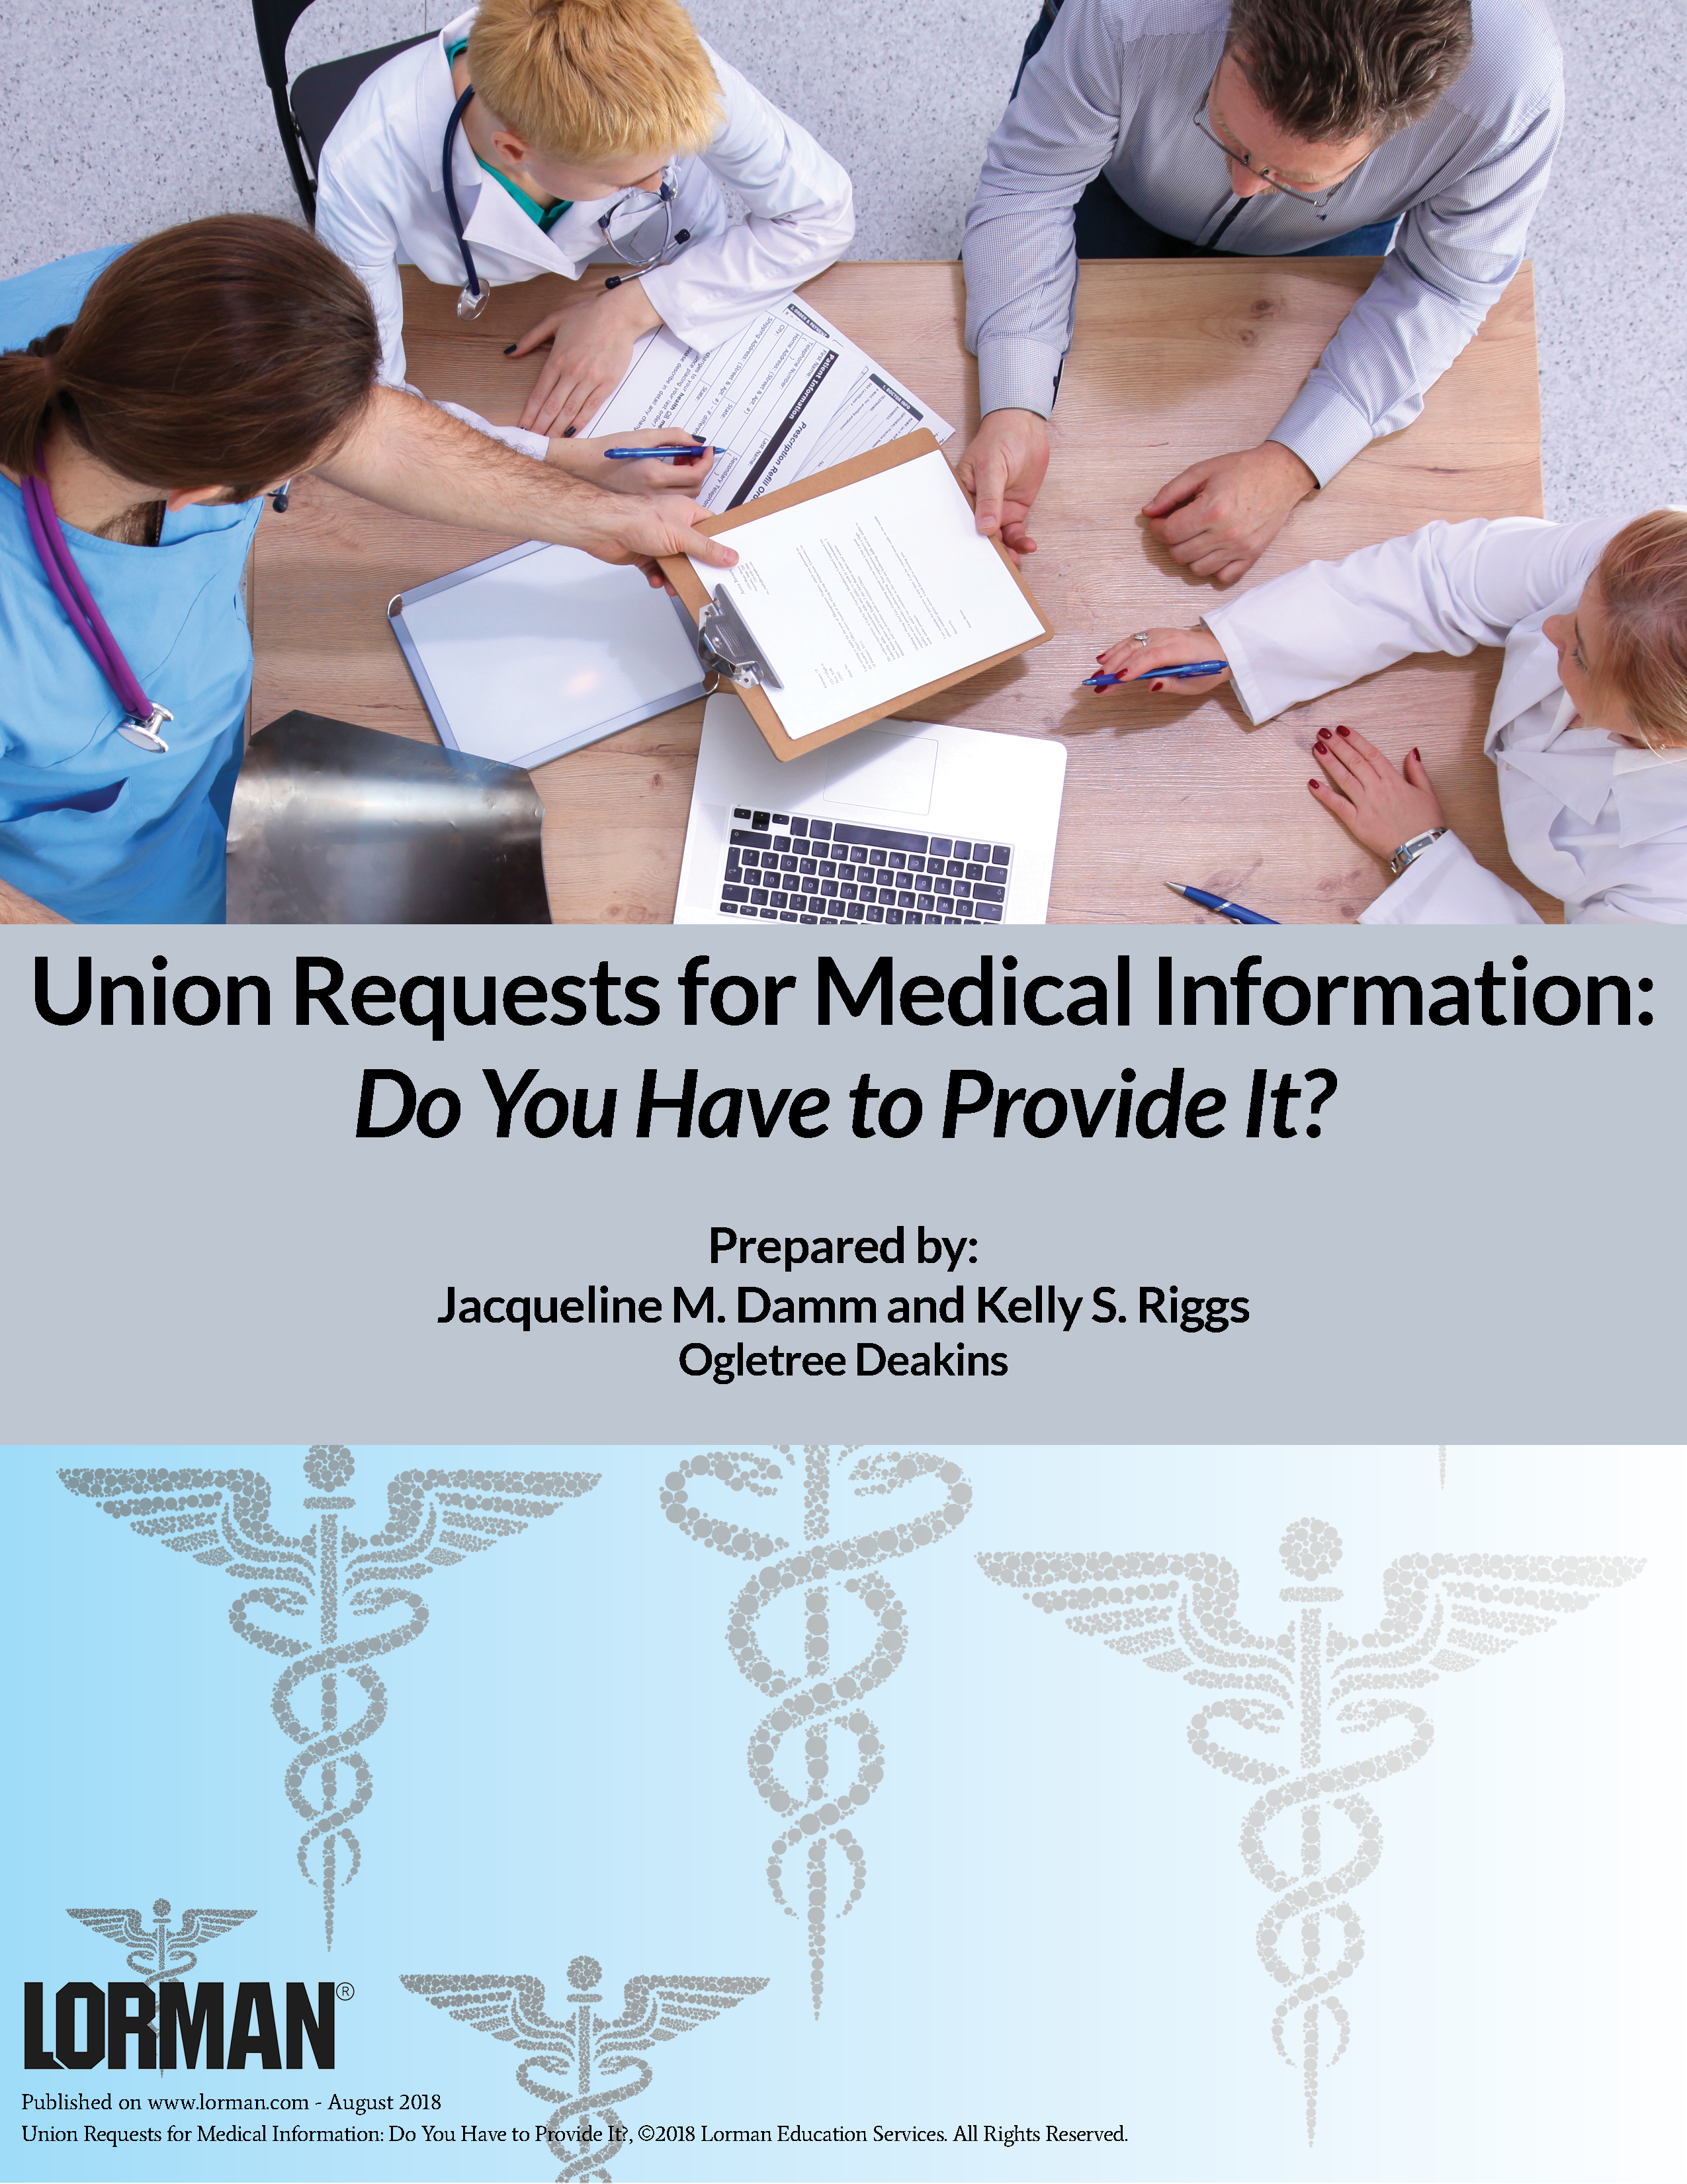 Union Requests for Medical Information: Do You Have to Provide It?